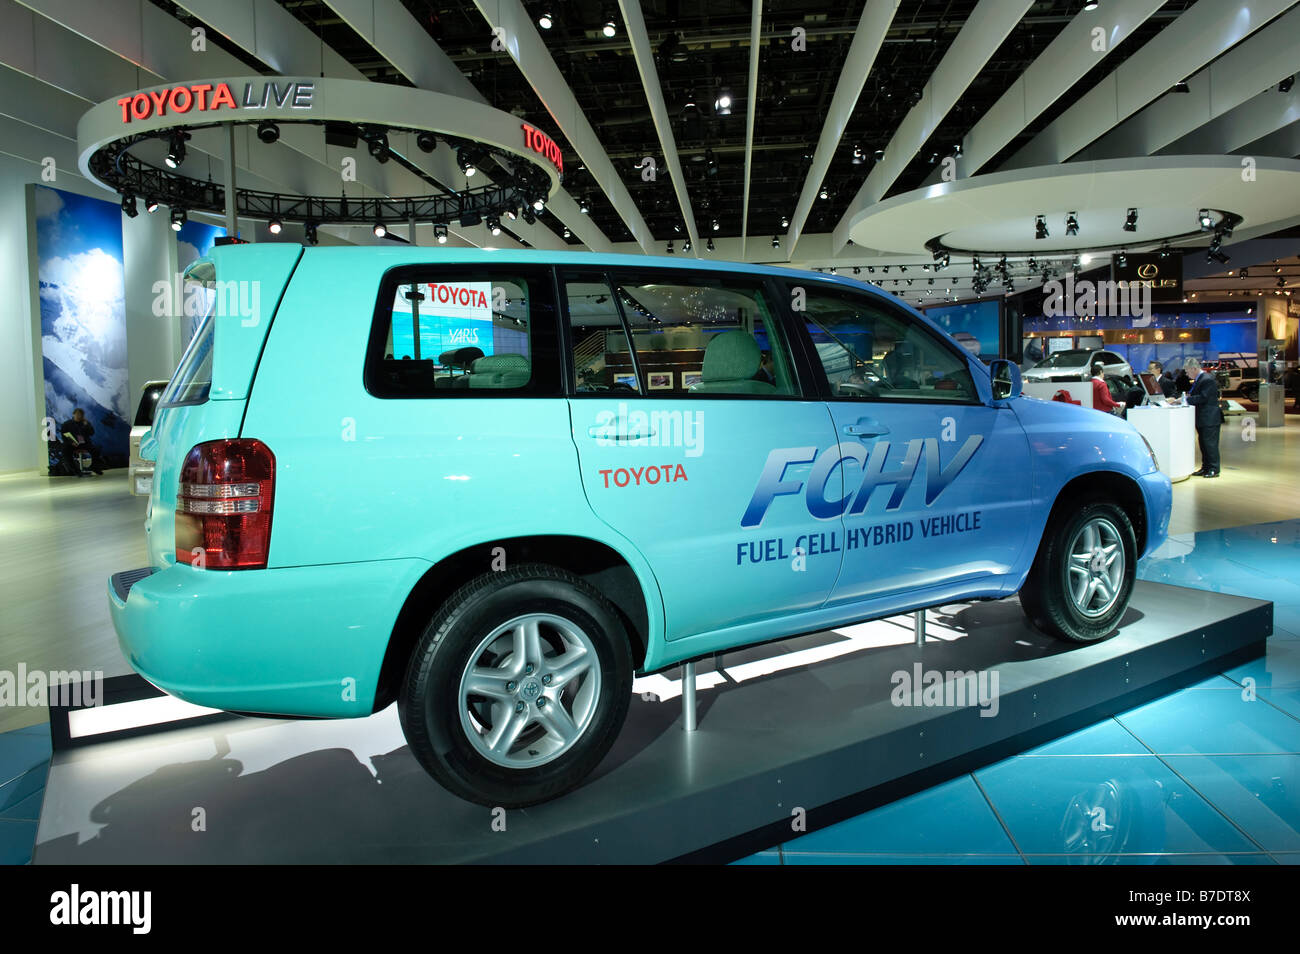 Toyota FCHV fuel cell hybrid vehicle at the 2009 North American International Auto Show in Detroit Michigan USA Stock Photo